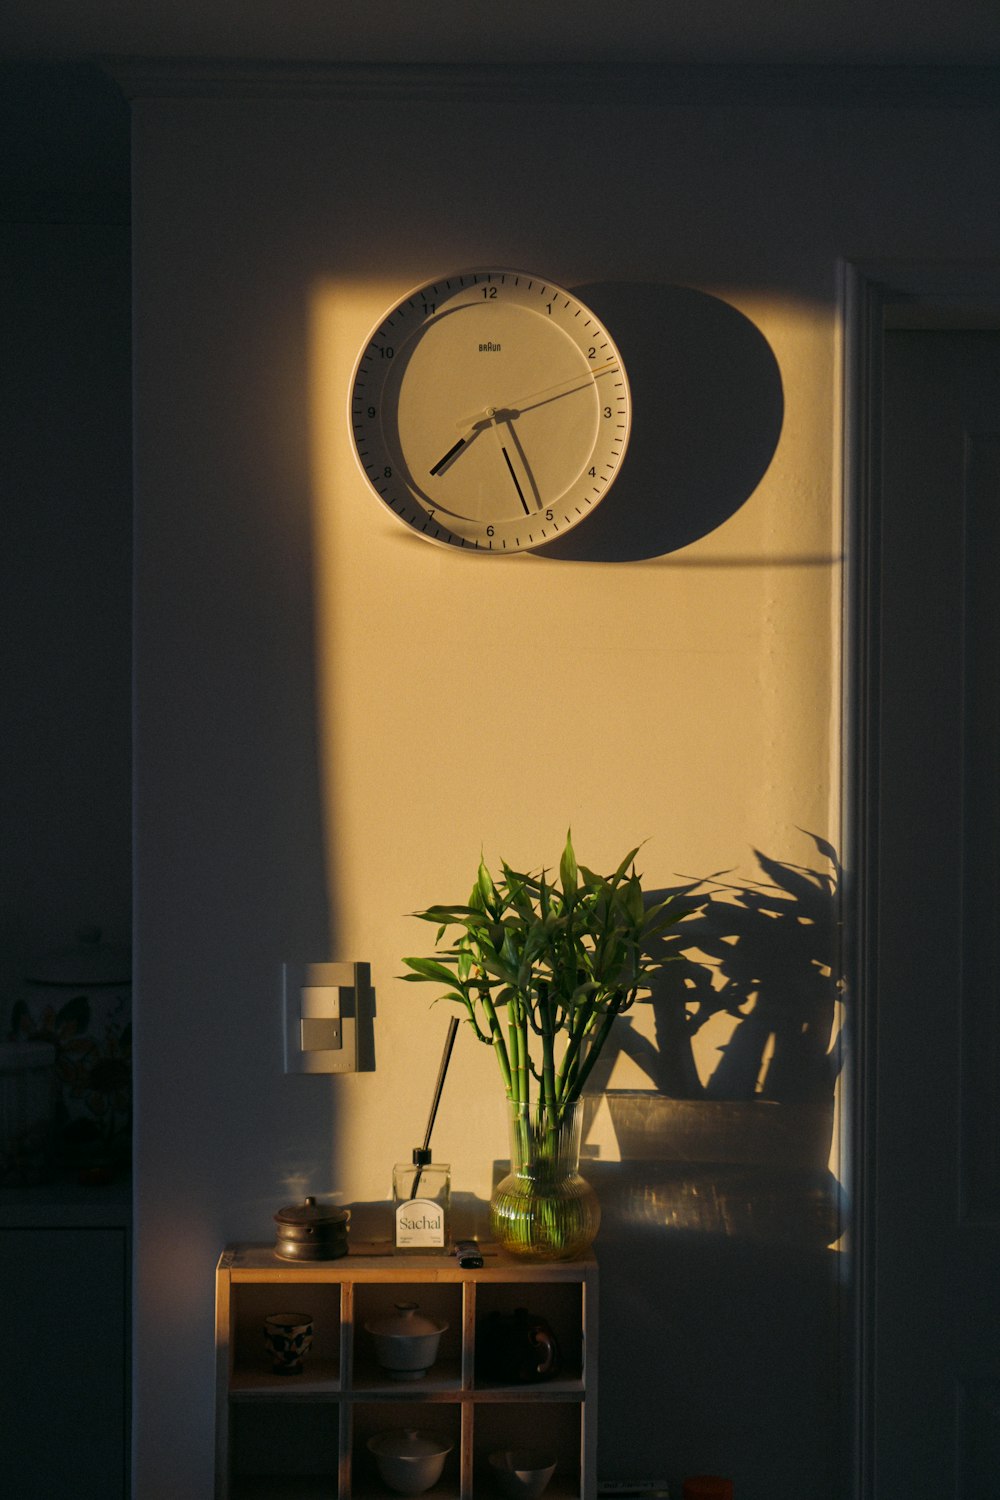 a clock mounted on the wall above a plant